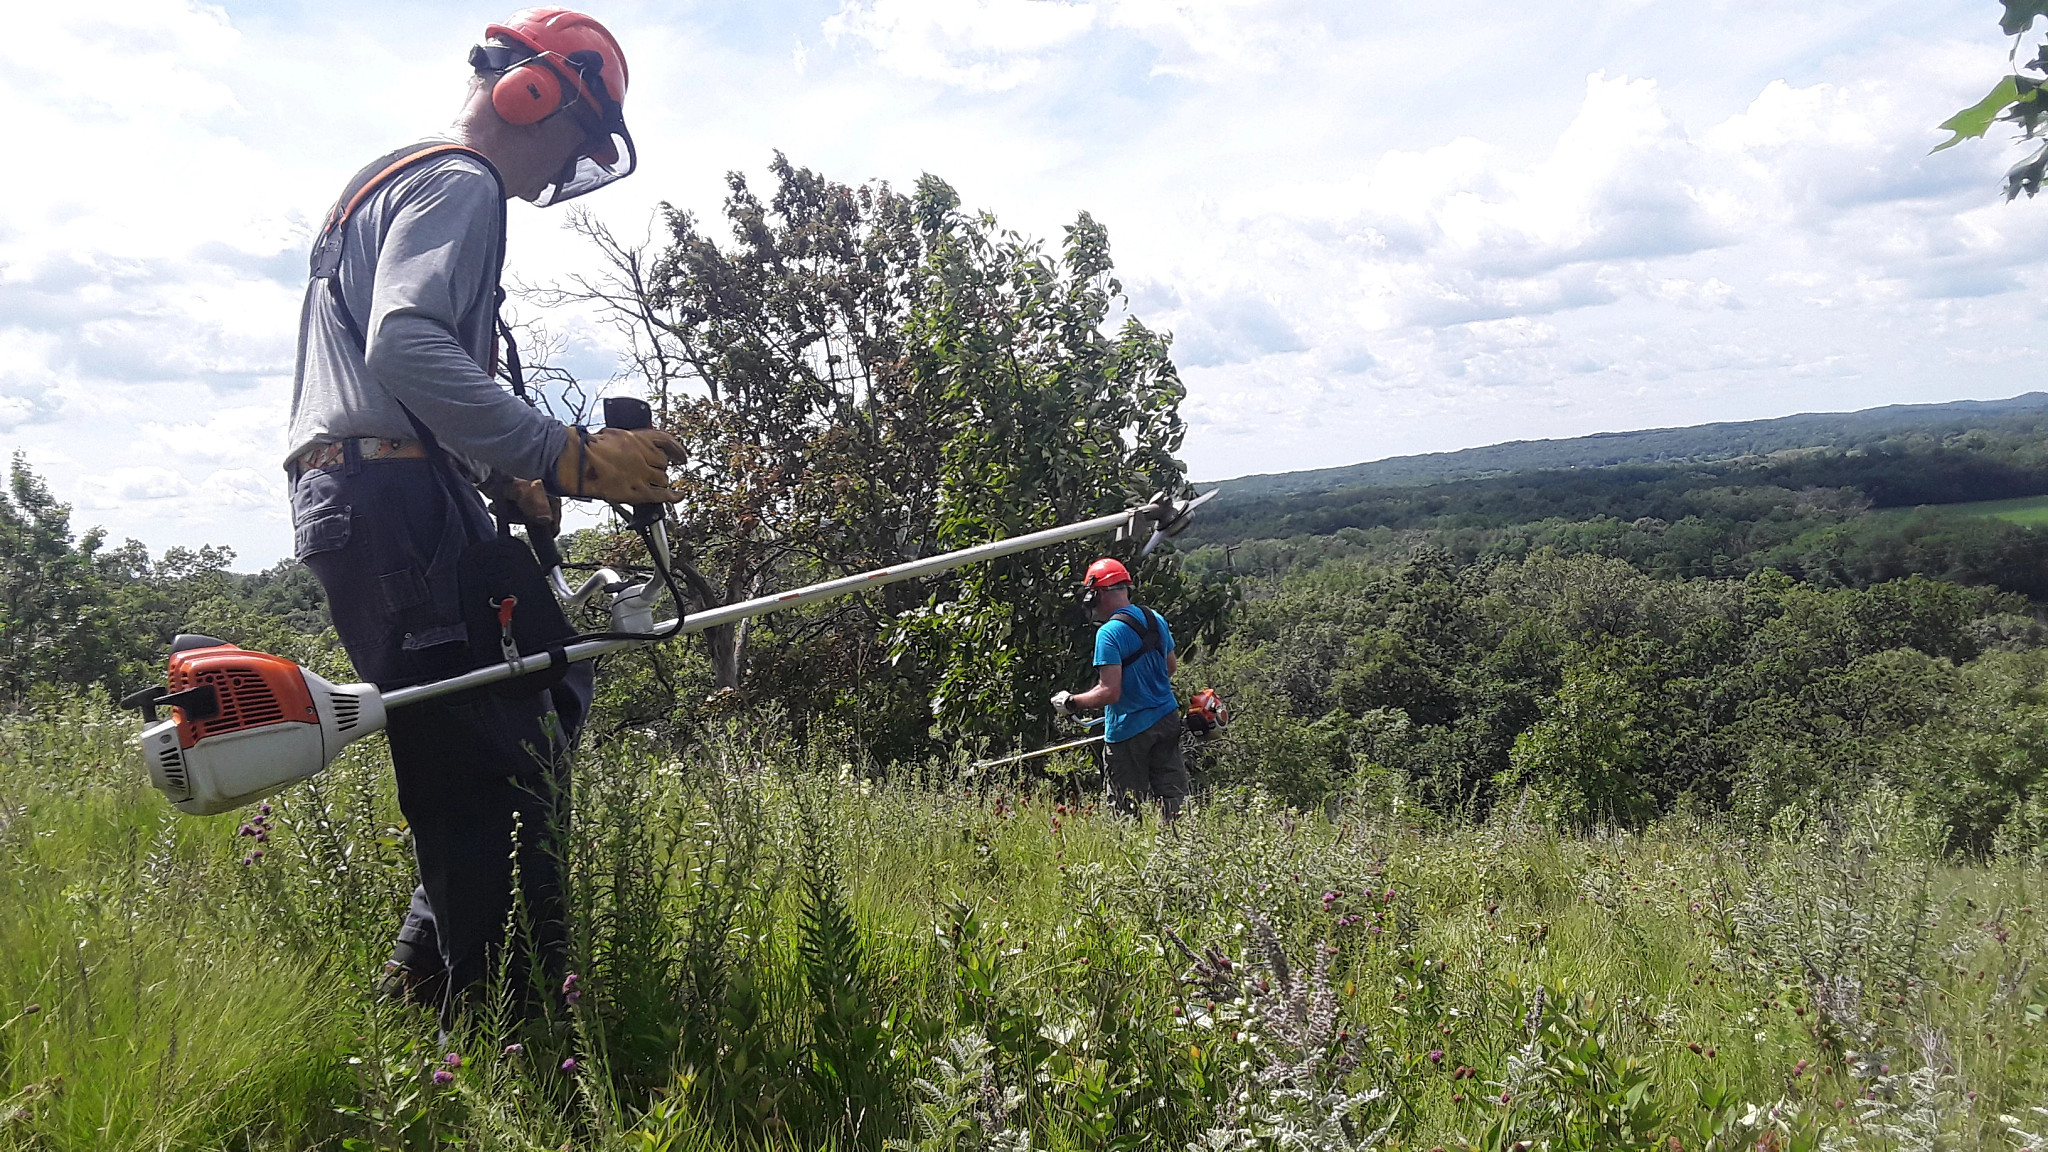 two men wear safety gear as they use weed wackers to cut back invasive species on a hillside